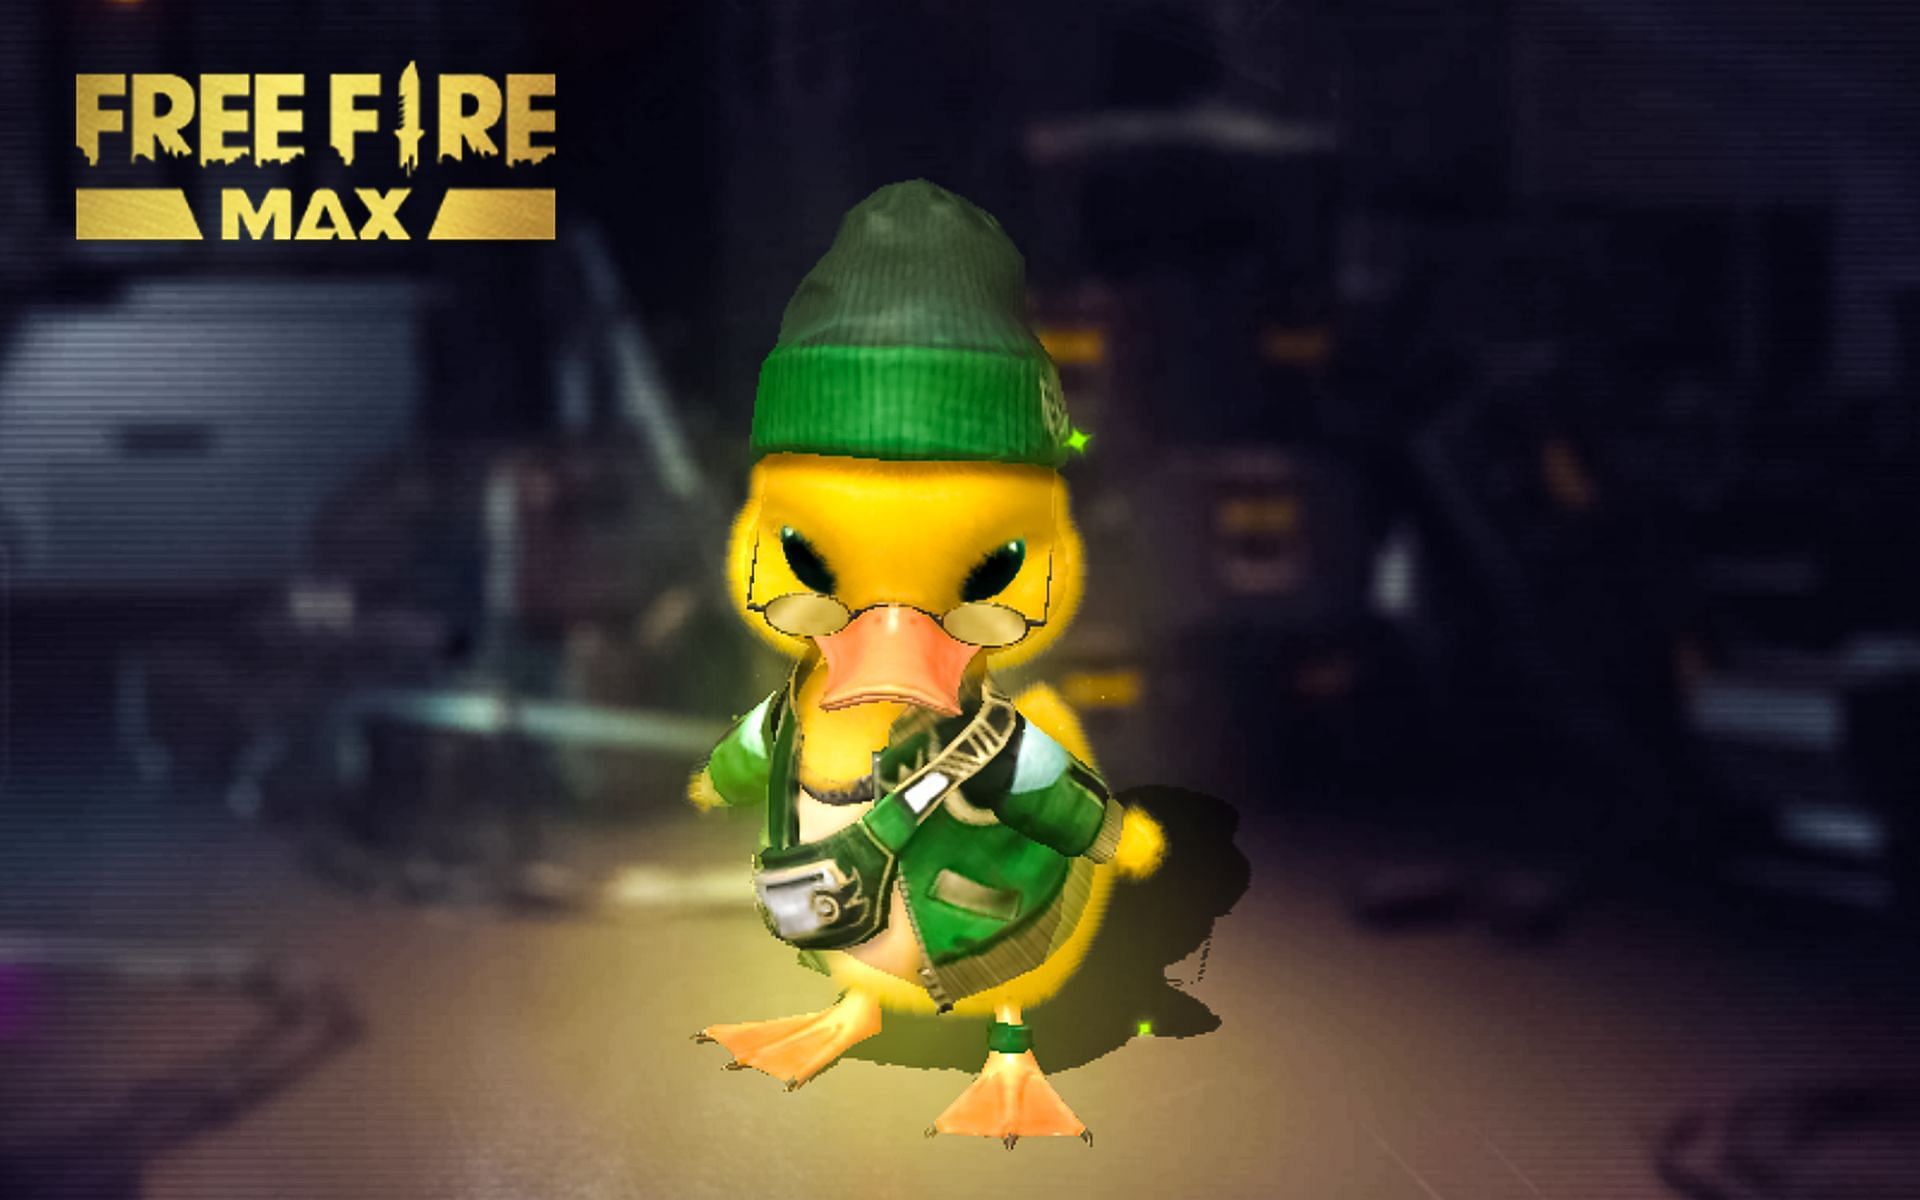 Here is the FFWS Beanie pet skin that players can get for free in Free Fire MAX (Image via Garena)